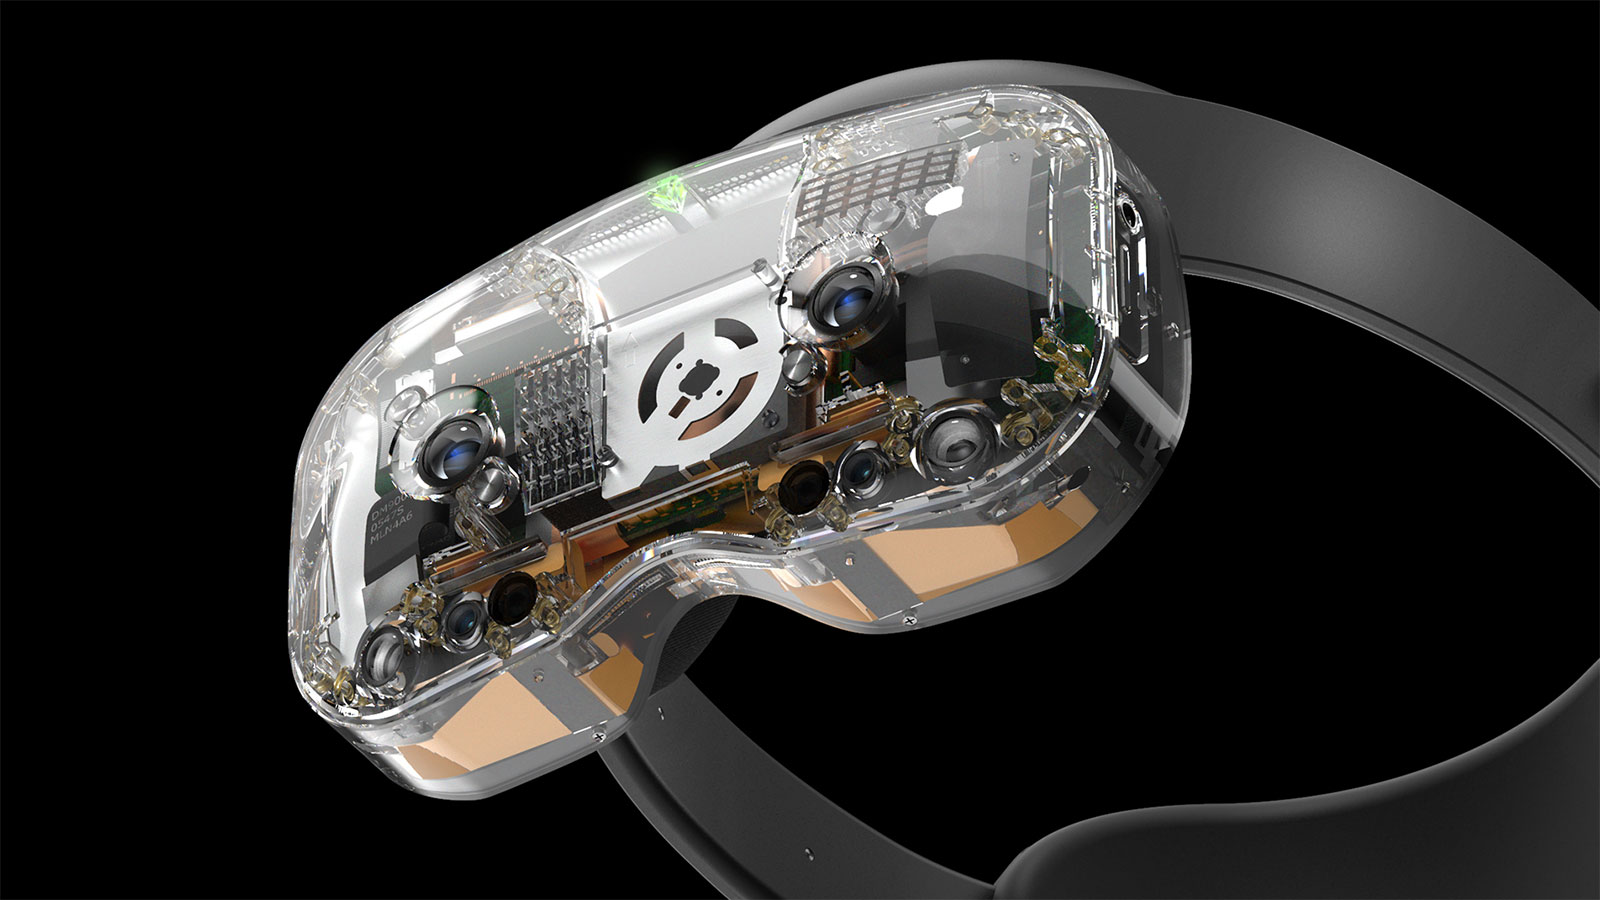 Lynx R1 headset with Ultraleap hand tracking